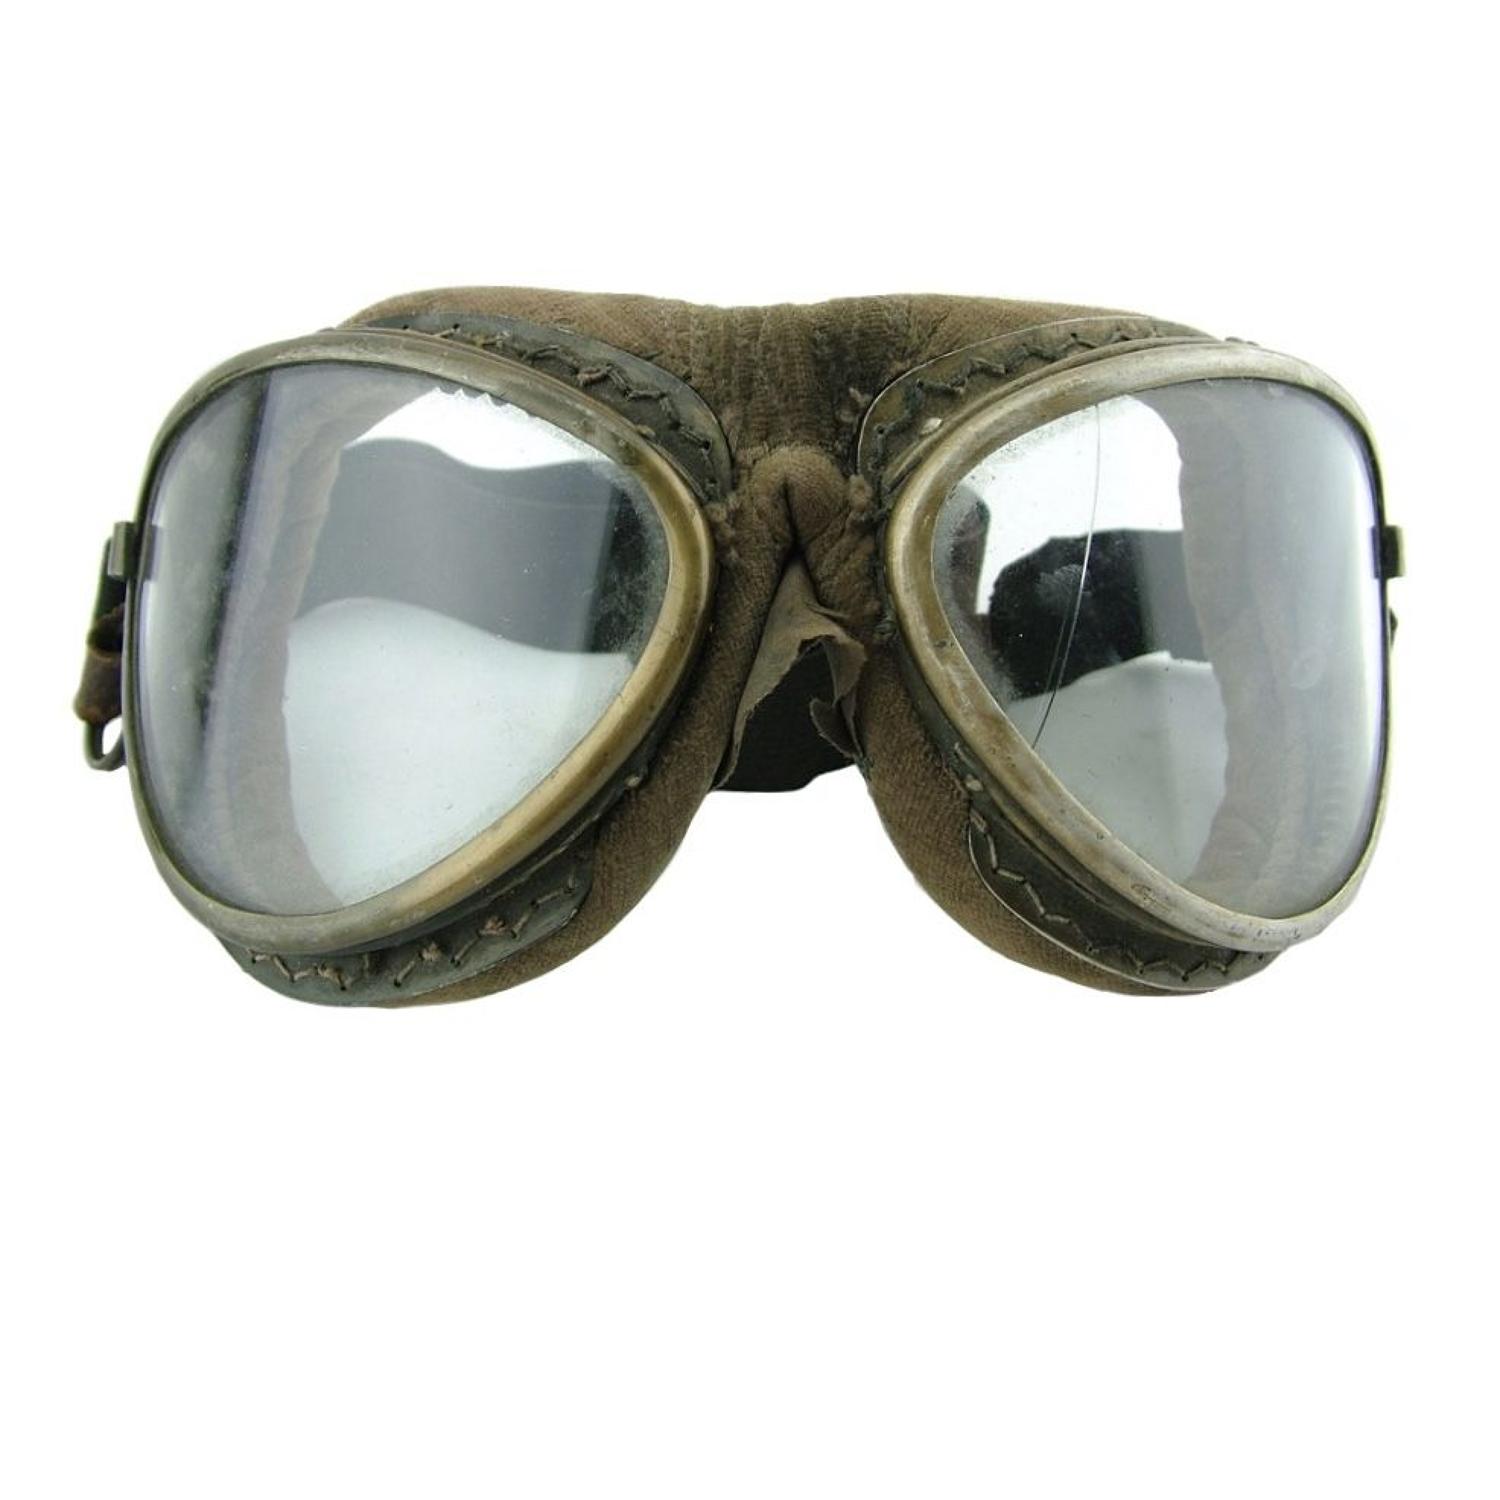 Imperial Japanese Army/Navy flying goggles